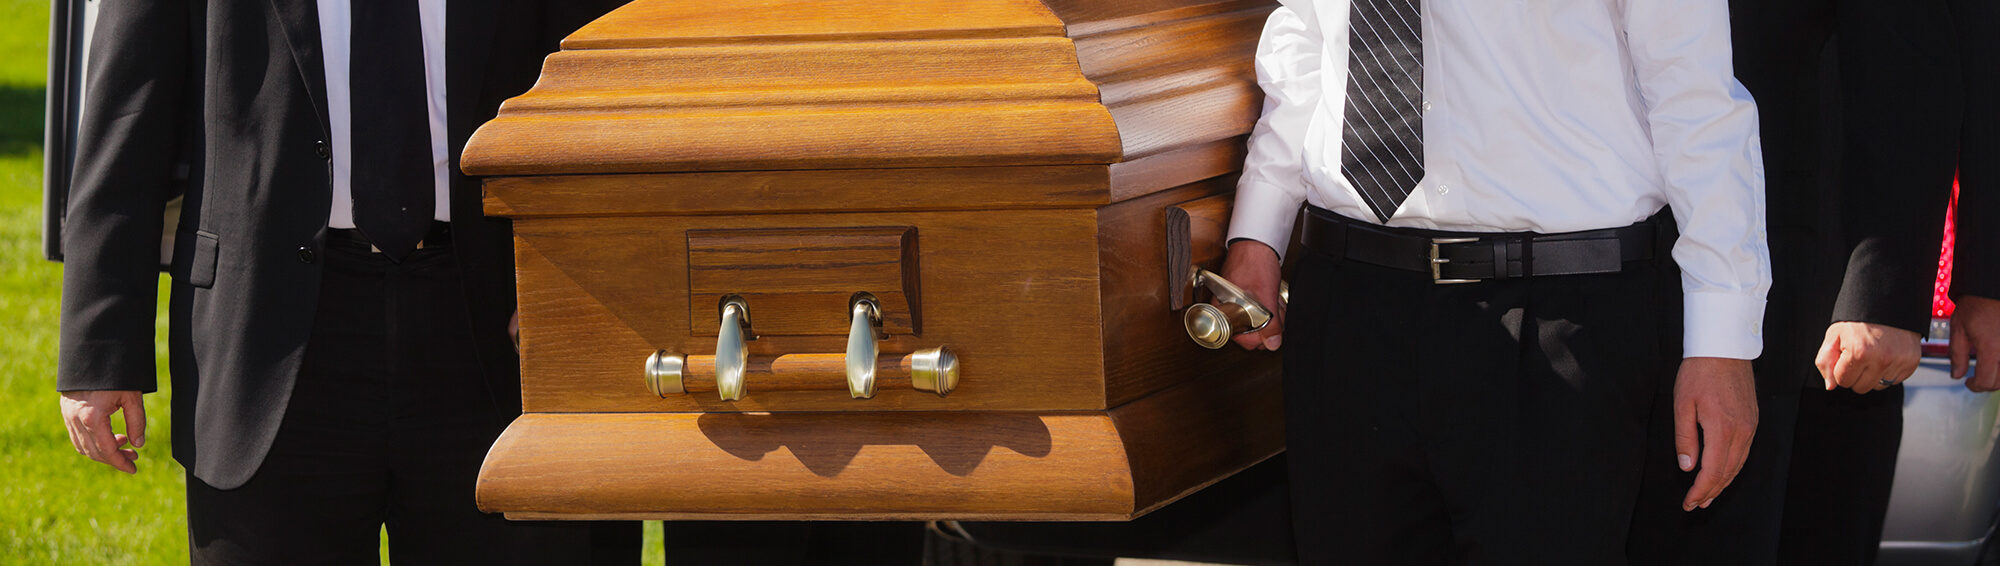 Our Wrongful Death Lawyers Are Here for You